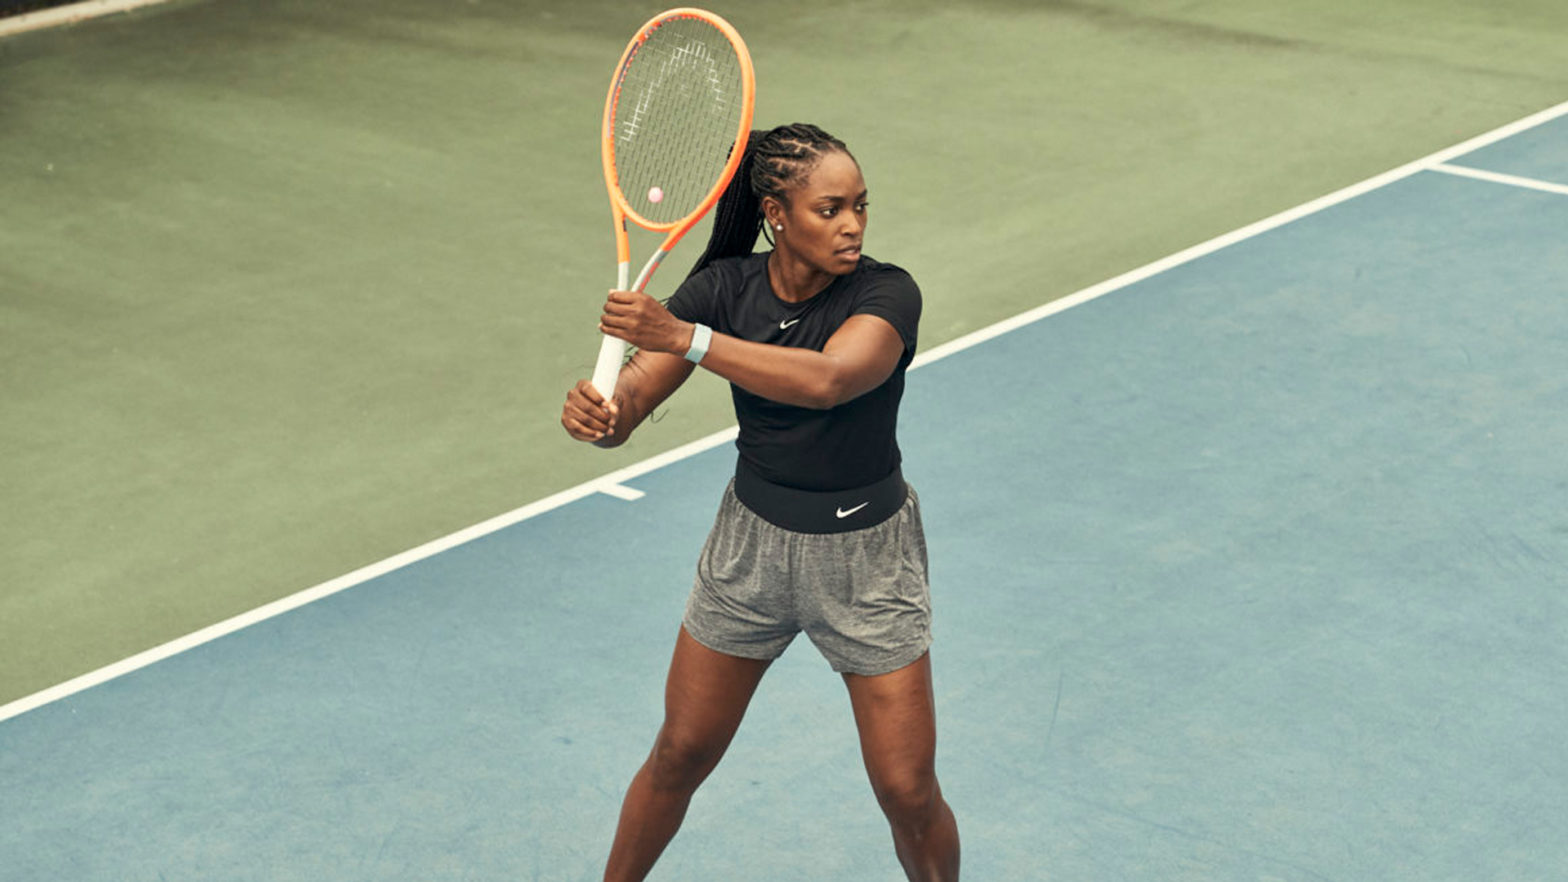 Tennis Star Sloane Stephens Becomes First WTA Player To Ink Deal With Wellness Brand WHOOP